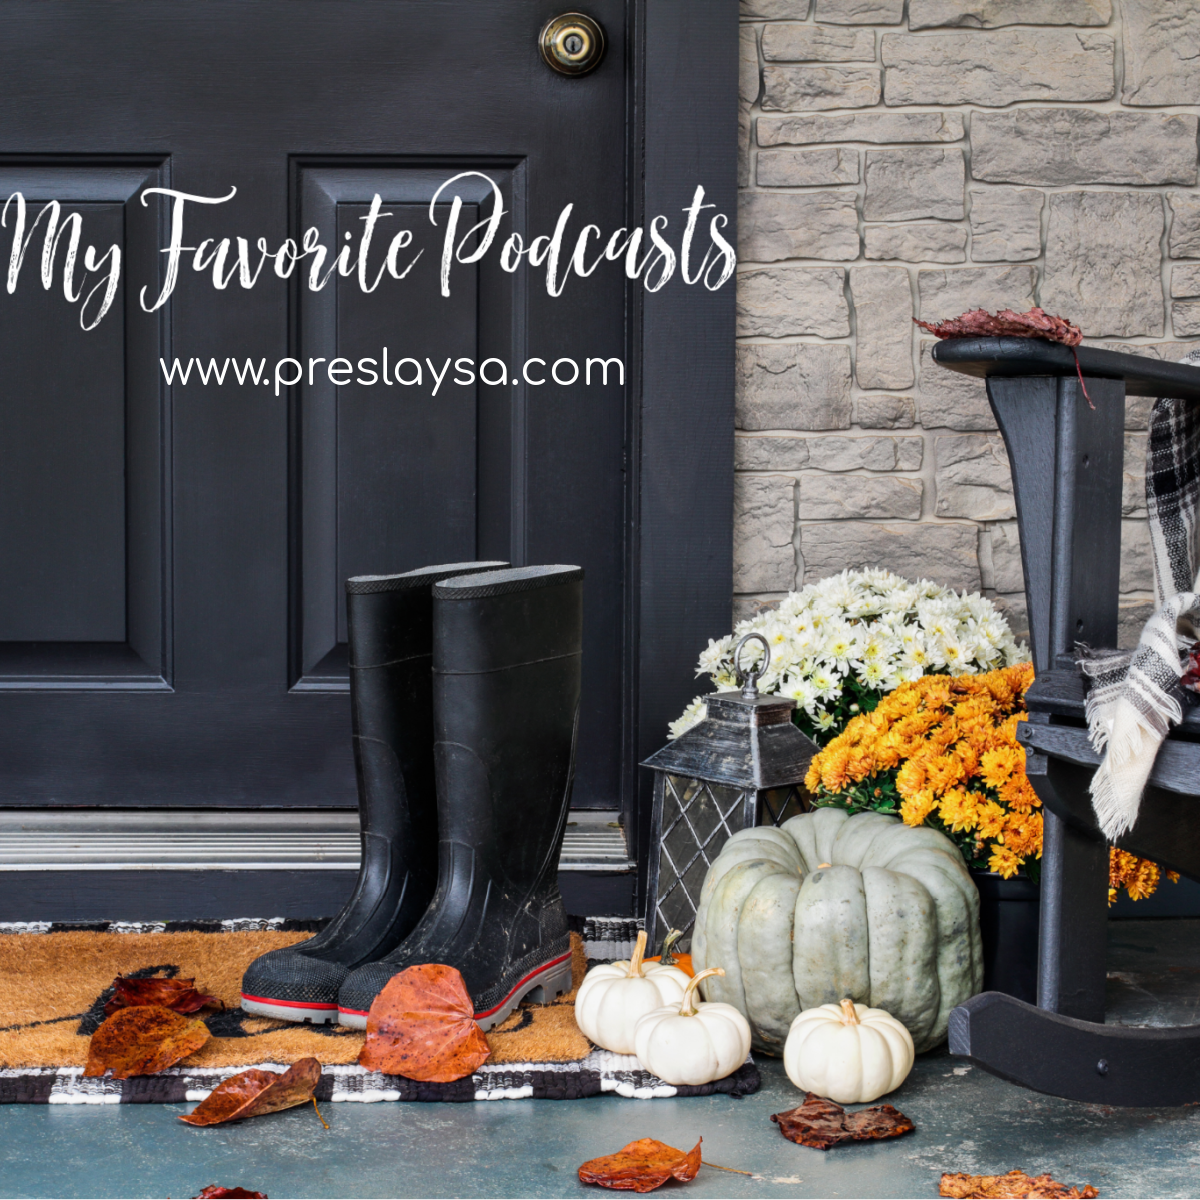 Rain boots, pumpkins, and a rocking chair at the front door